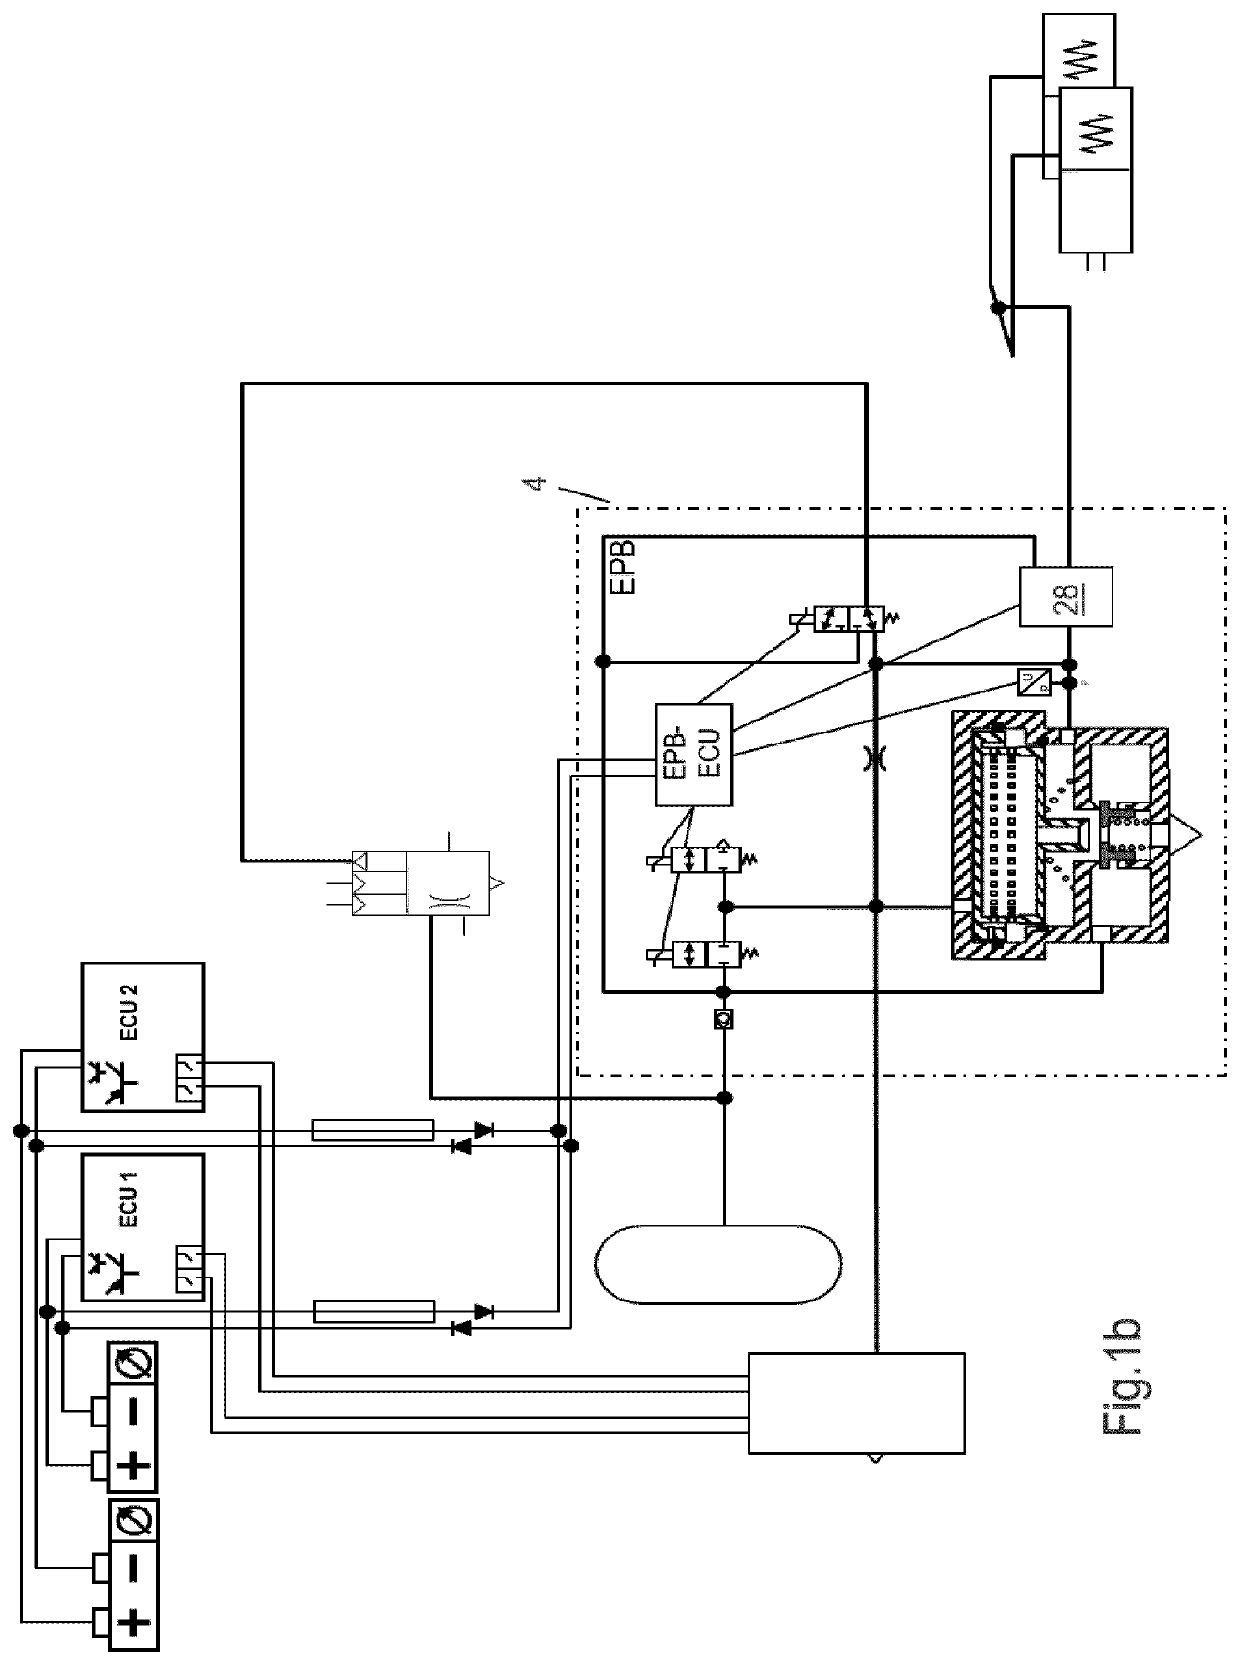 Electropneumatic equipment of a vehicle